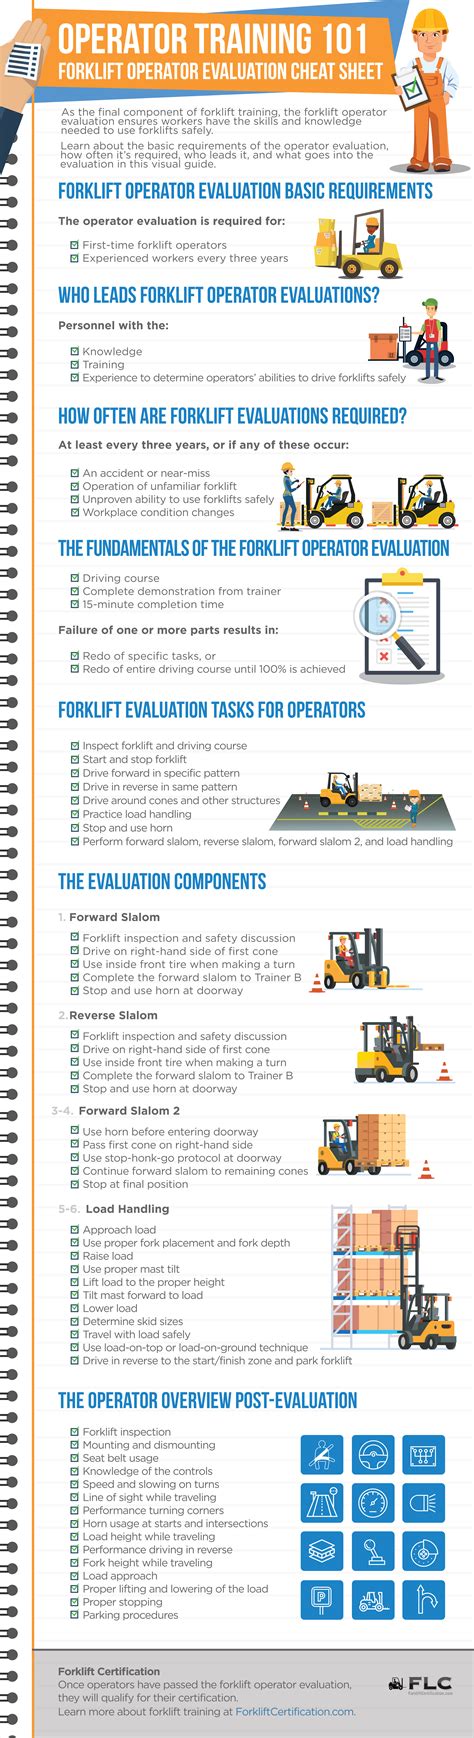 Forklift certification card templates for training institutes, training academy or employers who imbibe forklift certification / training adhering to osha guidelines. Forklift Training Template Free - Forklift Certification Template Awesome Certificate Stock ...